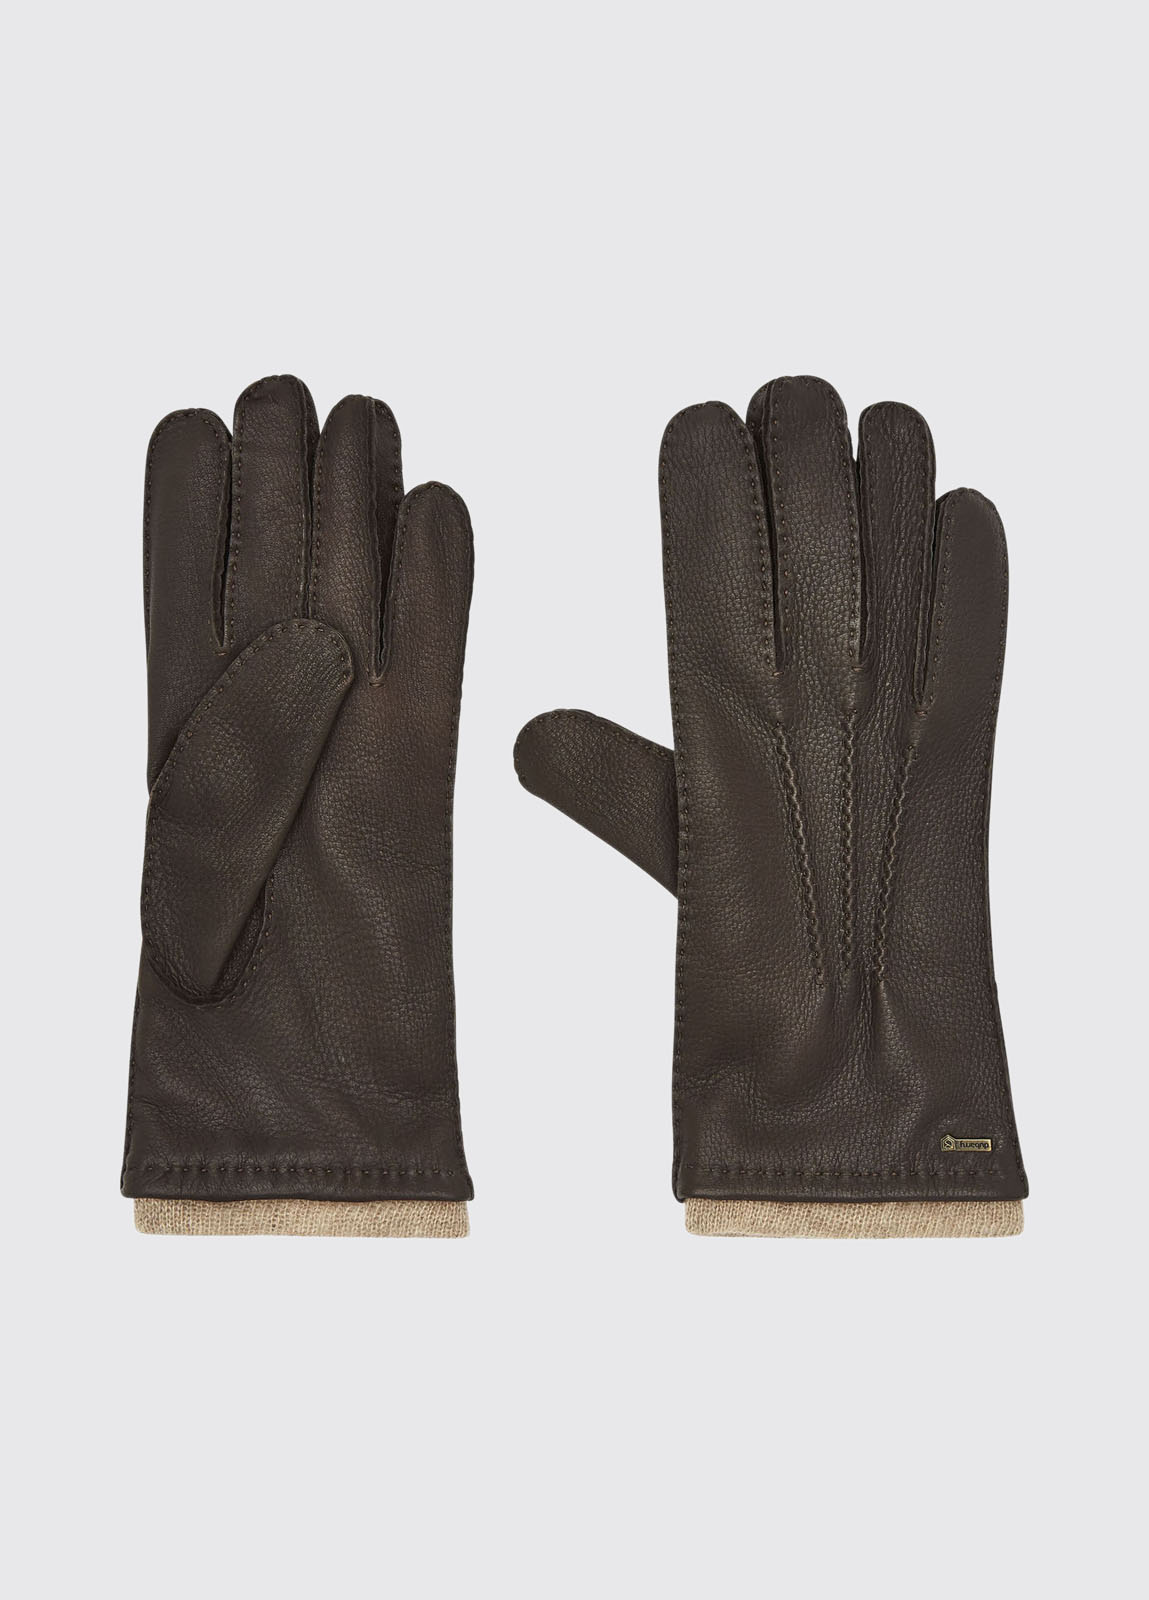 Kilconnell Leather Gloves - Mahogany